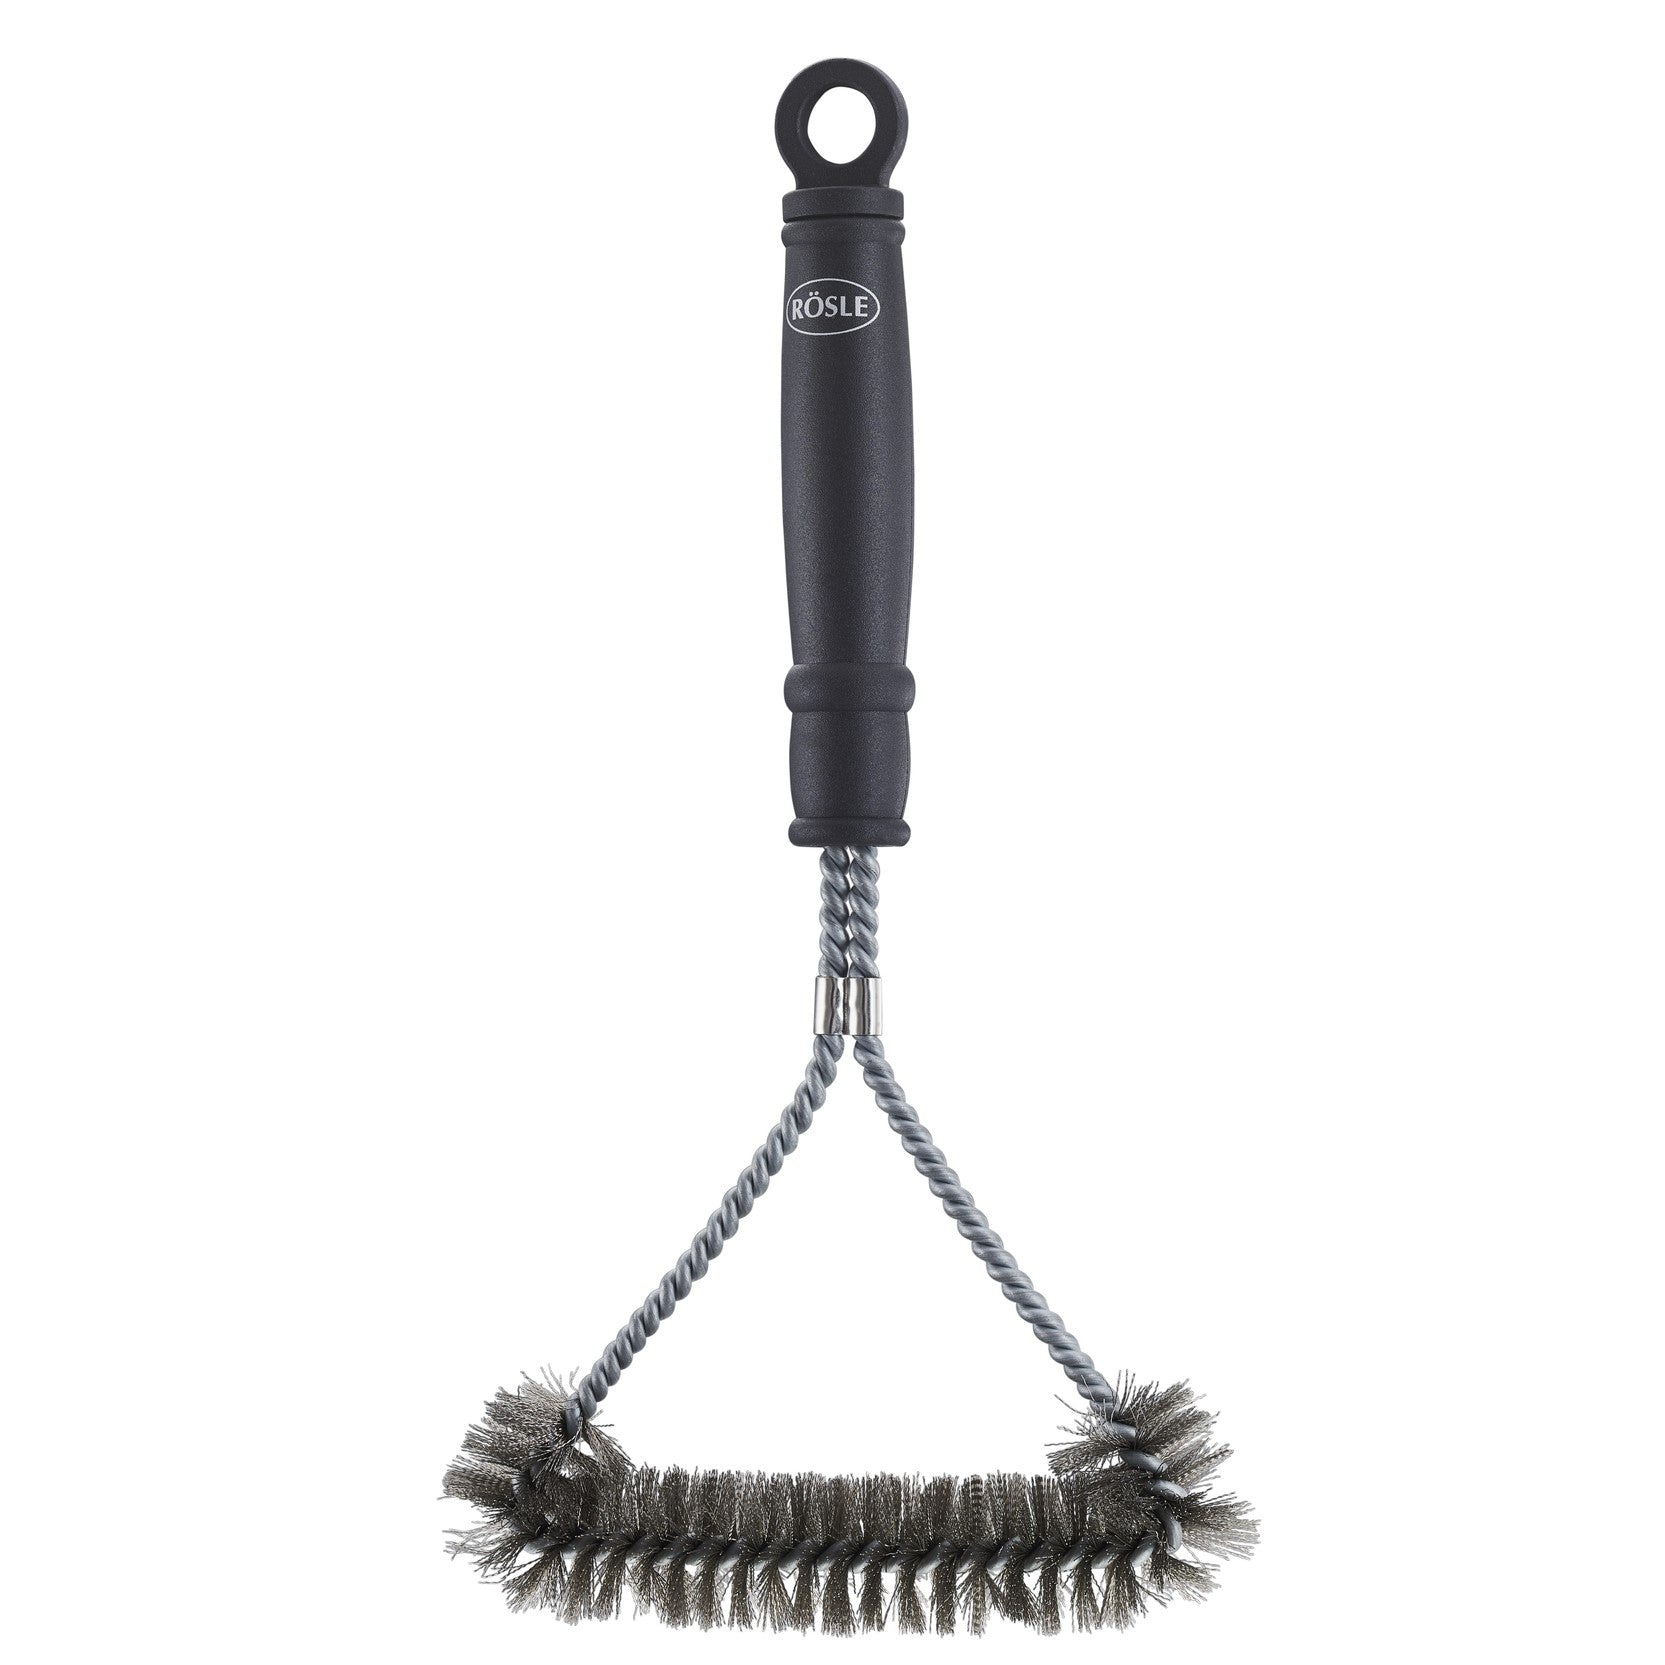 Roesle Braai or Grill Cleaning Brush with 16cm Brush Width